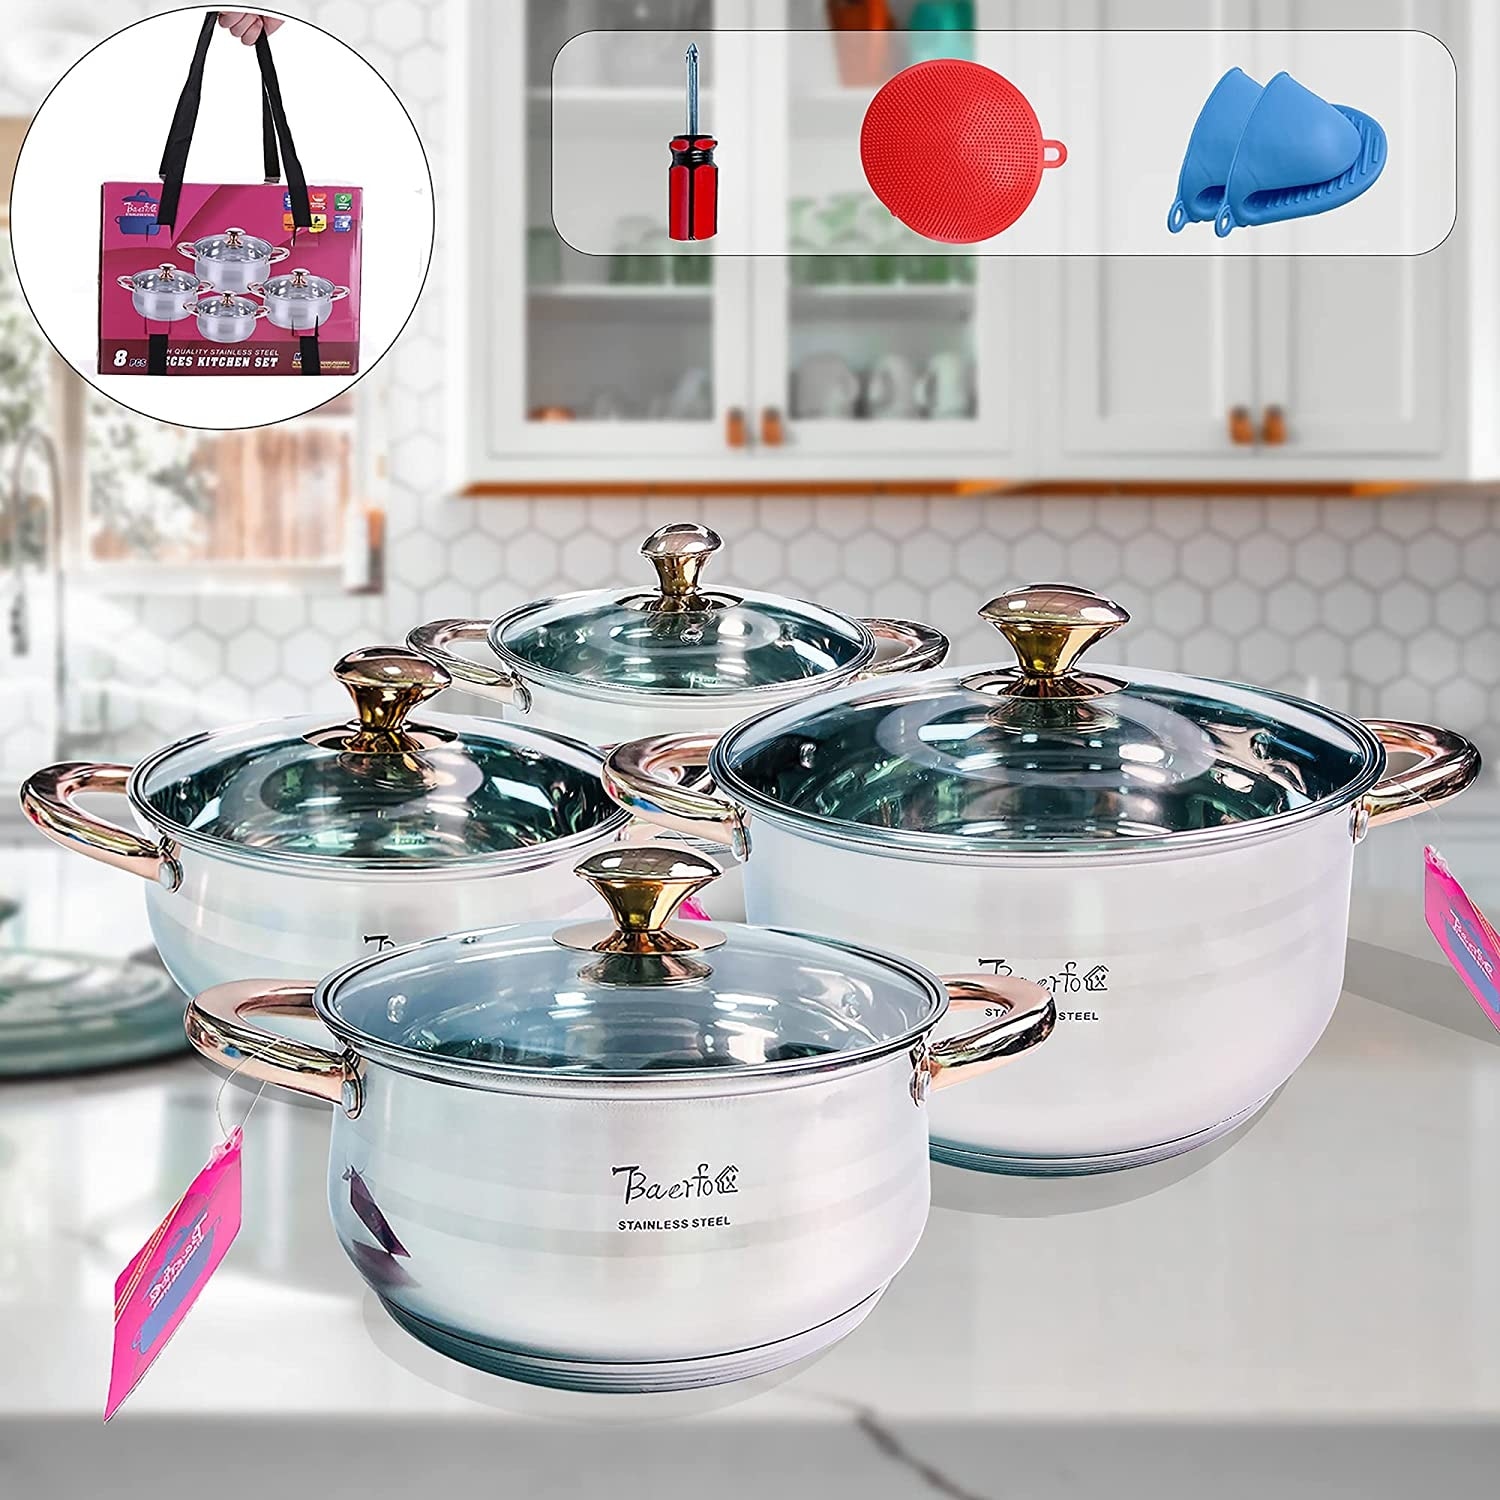 https://ak1.ostkcdn.com/images/products/is/images/direct/5617e2d6603c7e54a3d61b364128b852fa0be32a/18-8-Stainless-Steel-Pots-and-Pans-Set-nonstick-with-lids-8-Piece-Luxe-Silver-Cookware-Set-PFOA-Free-Non-Toxic.jpg